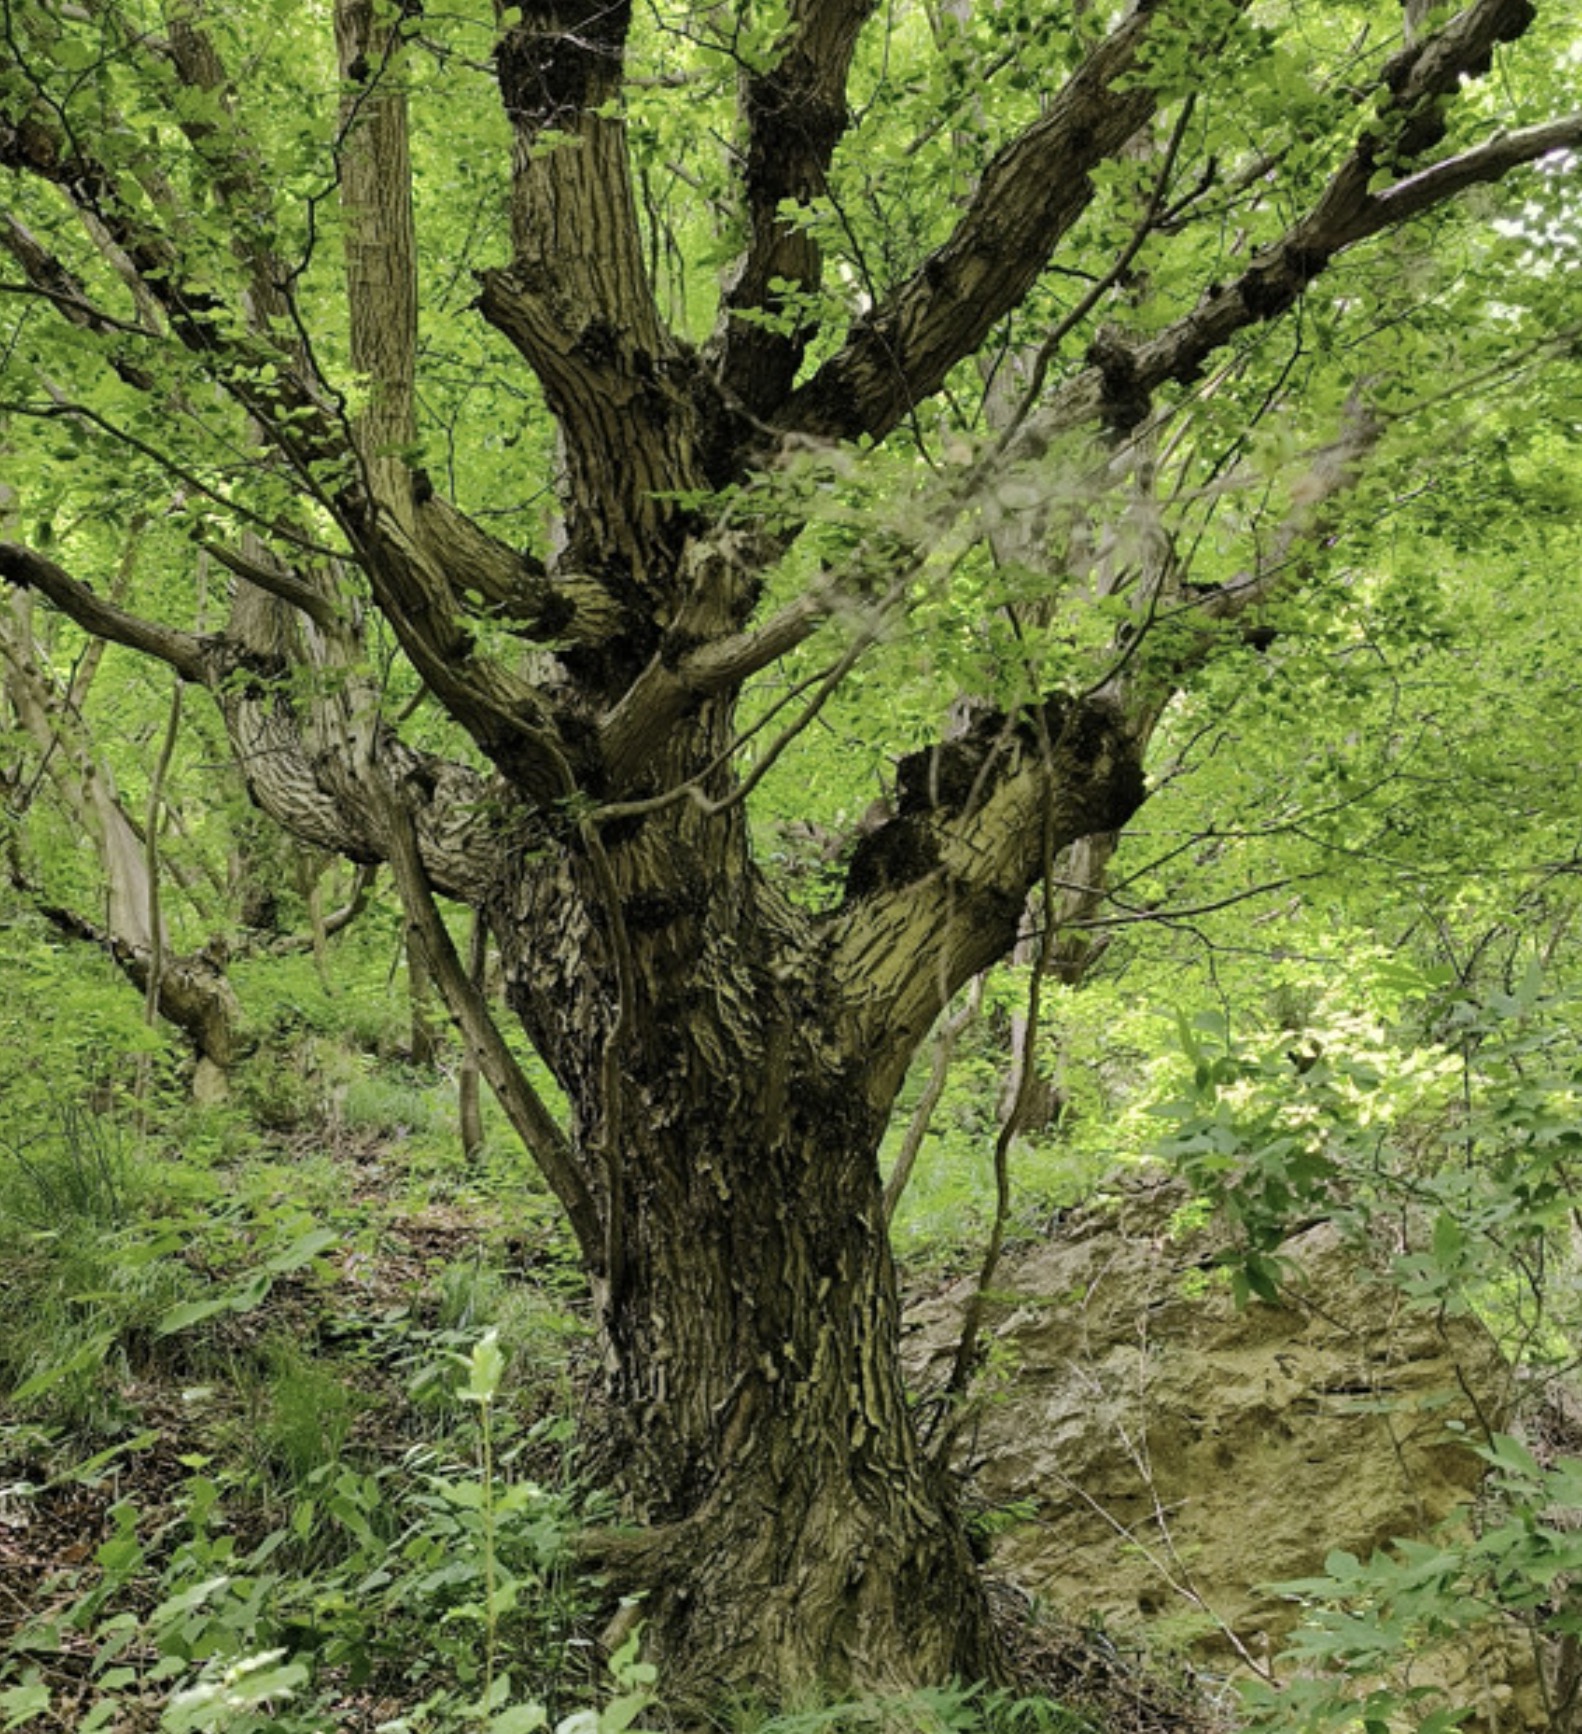 Large group of ancient trees older than 200 years found in Hebei